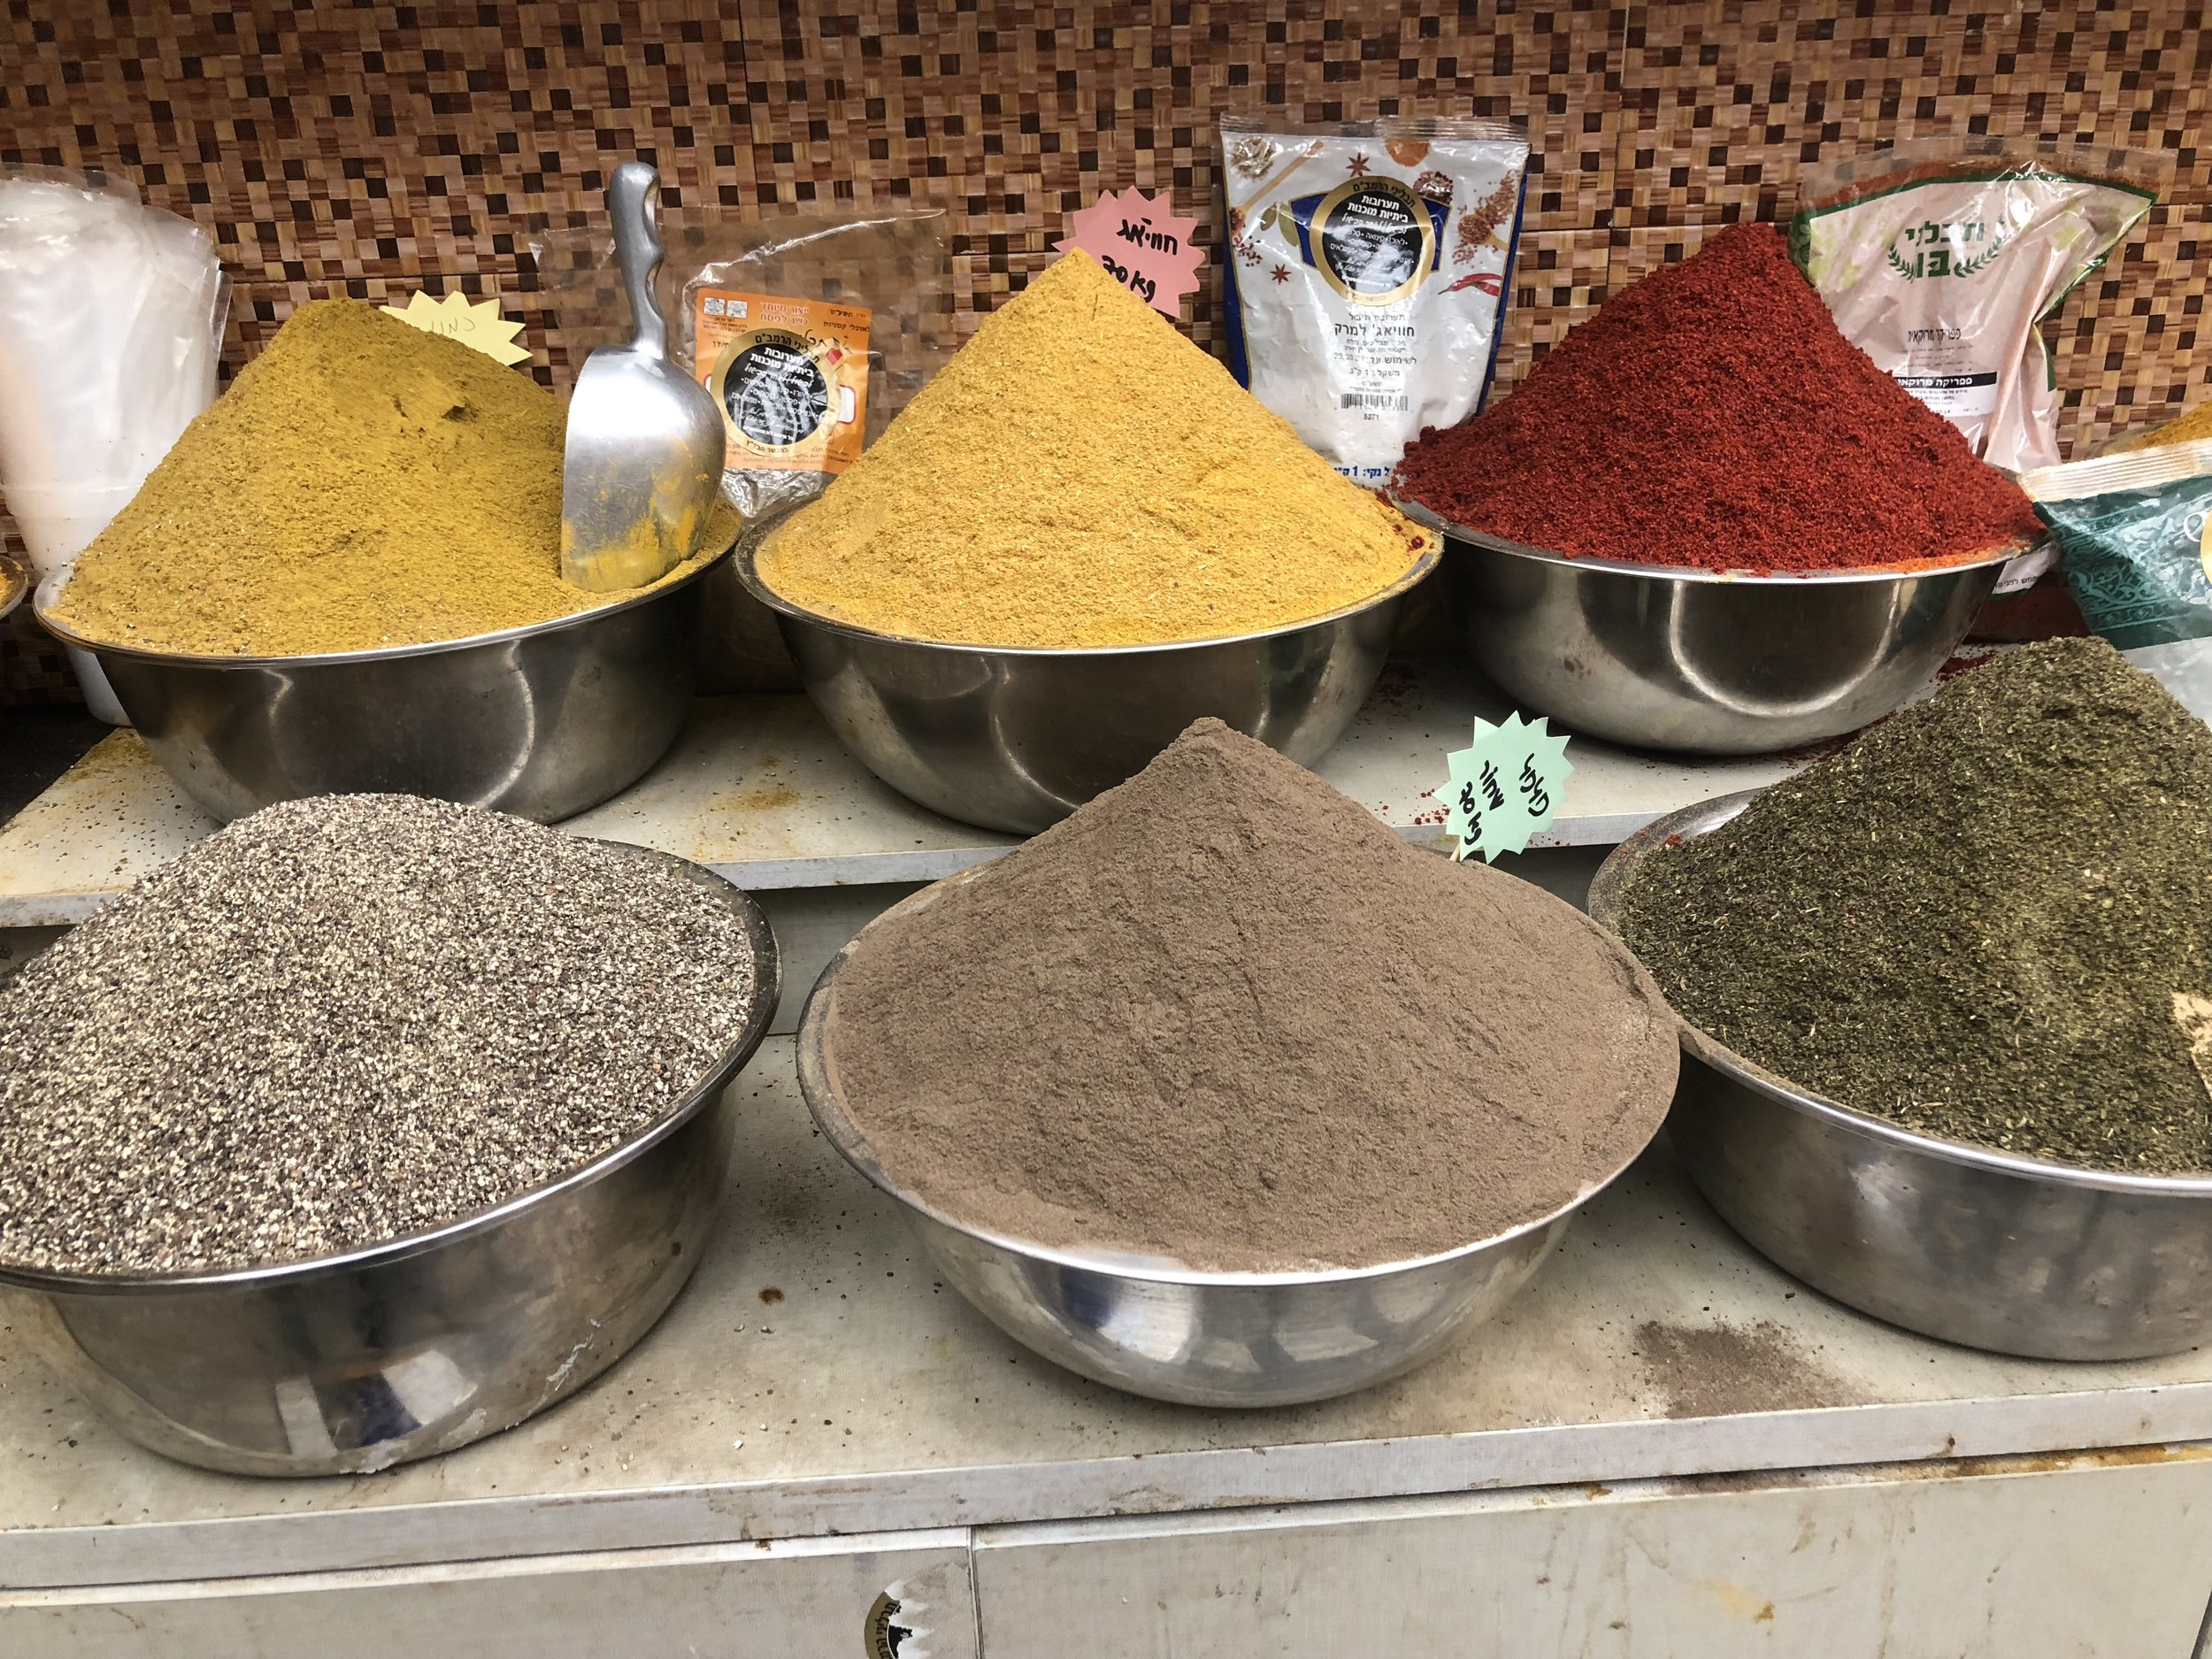 What's the Difference Between an Herb and a Spice?